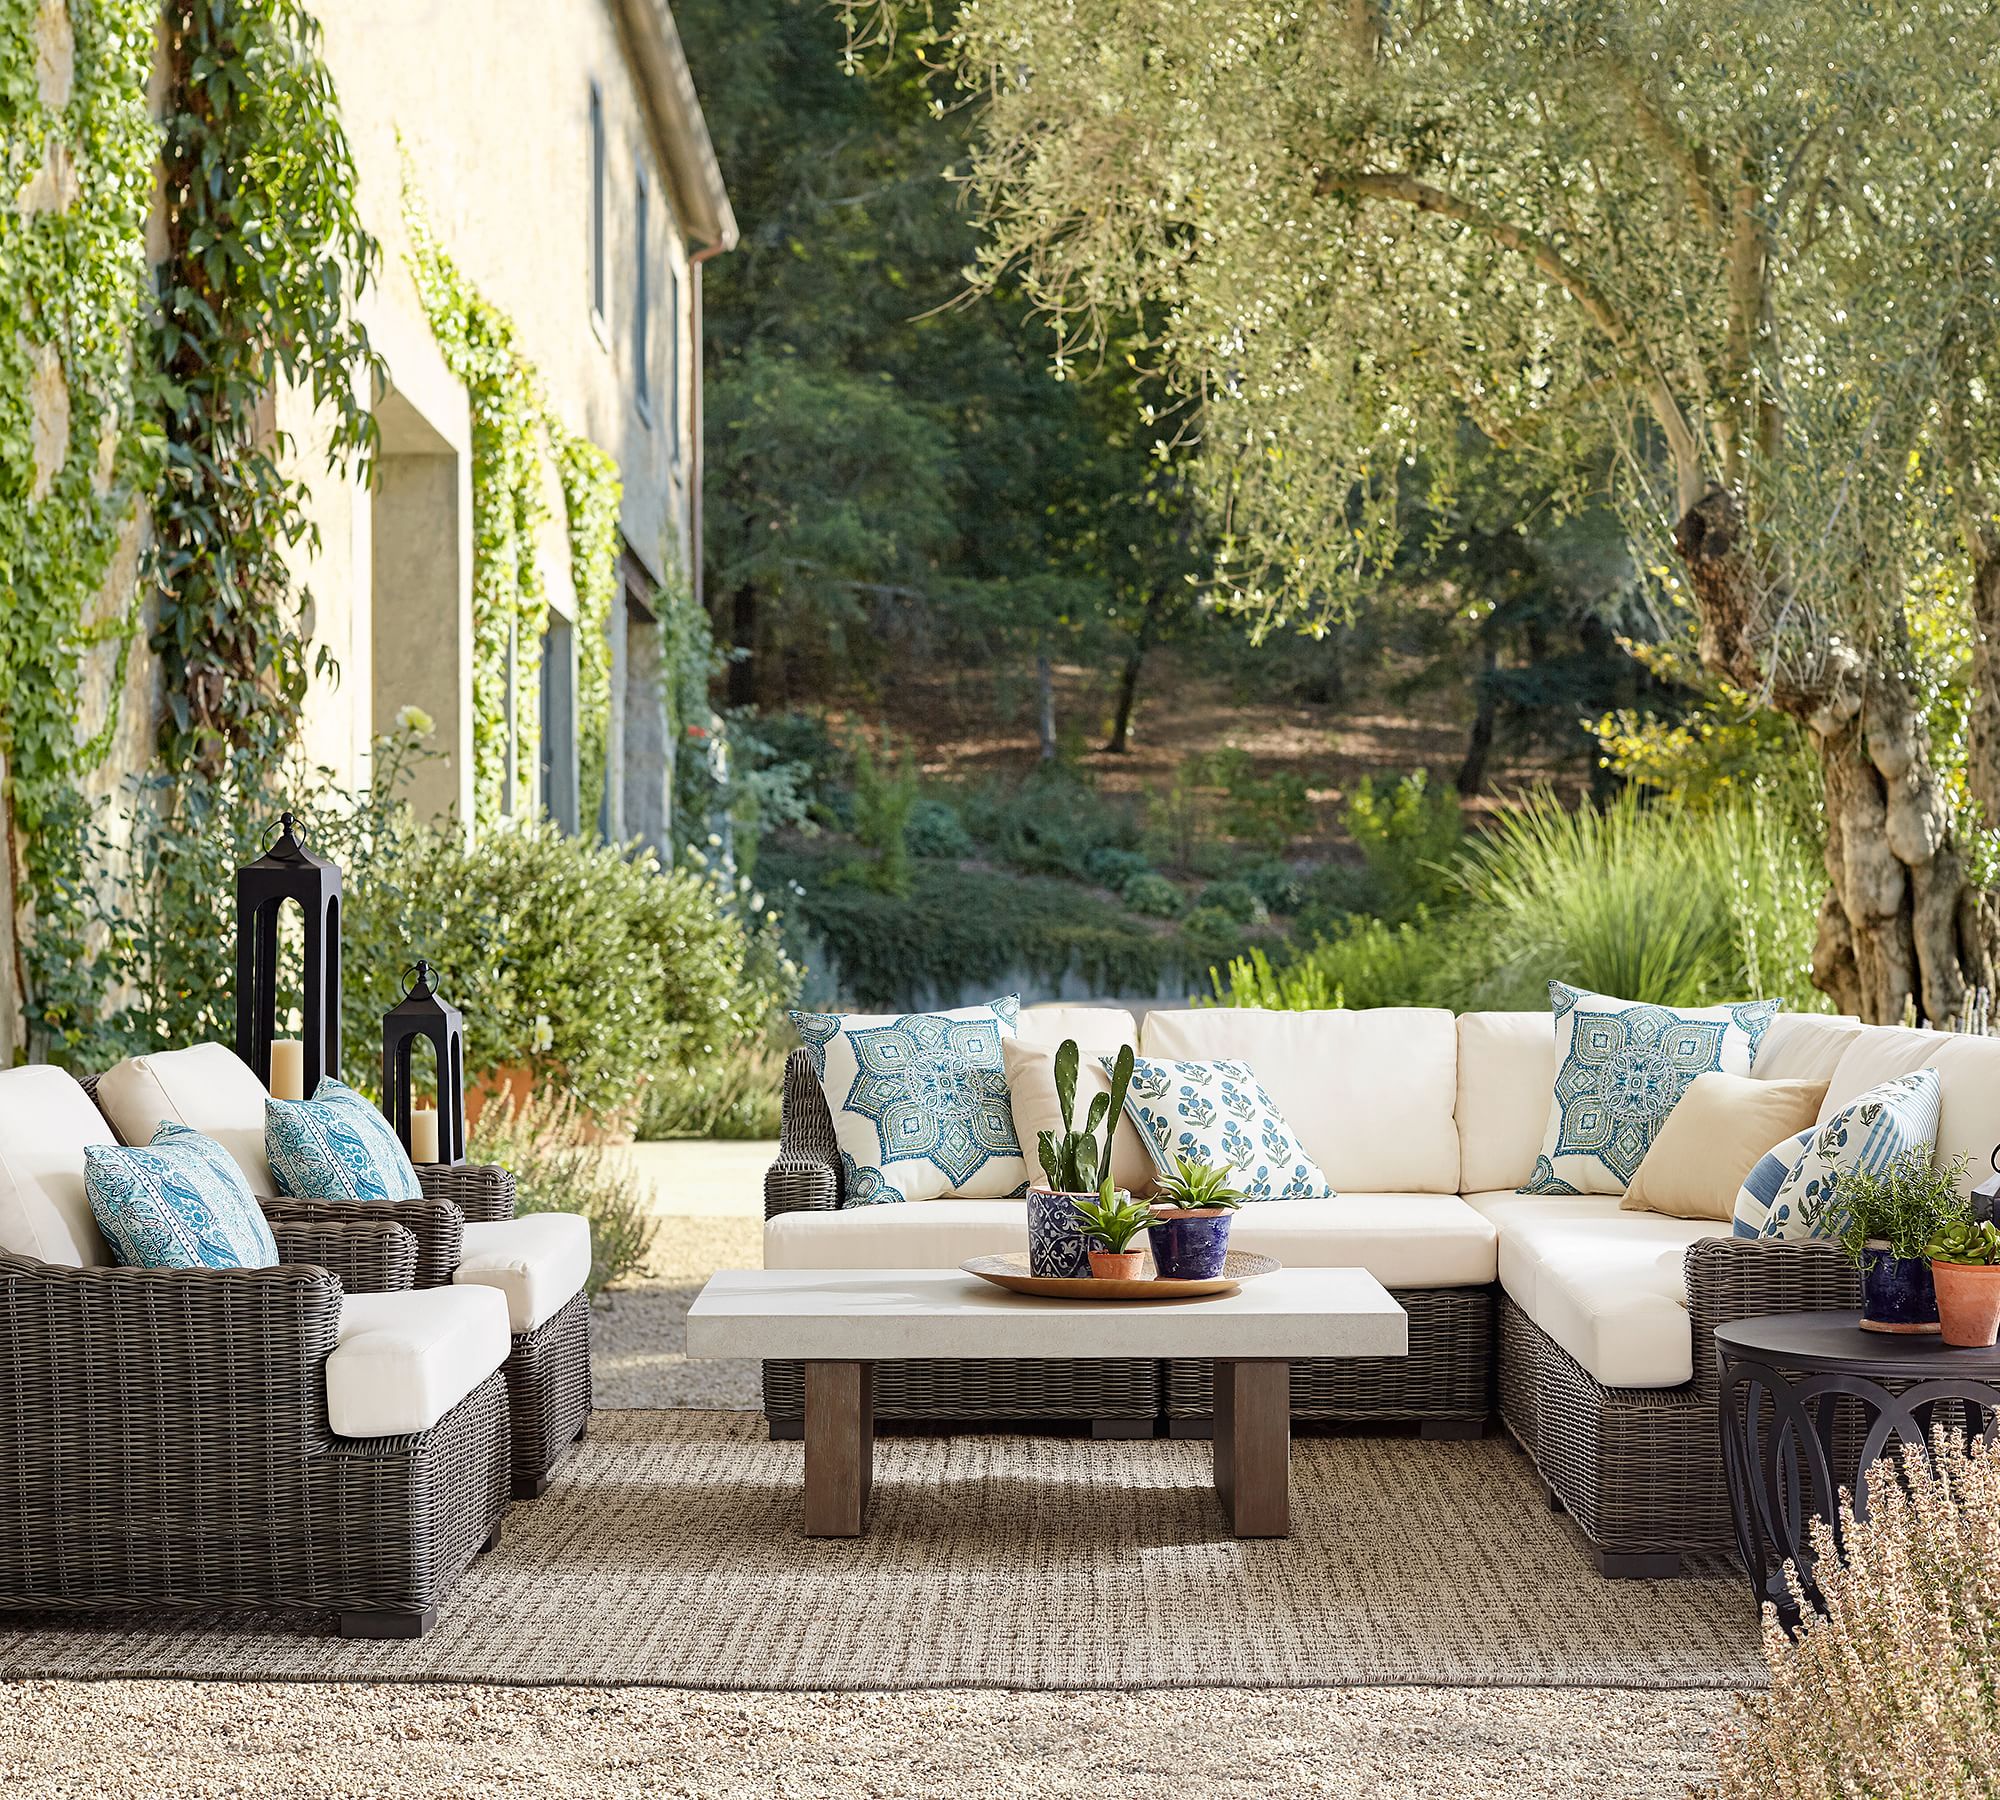 Open Box: Build Your Own - Huntington Wicker Slope Arm Outdoor Sectional Components